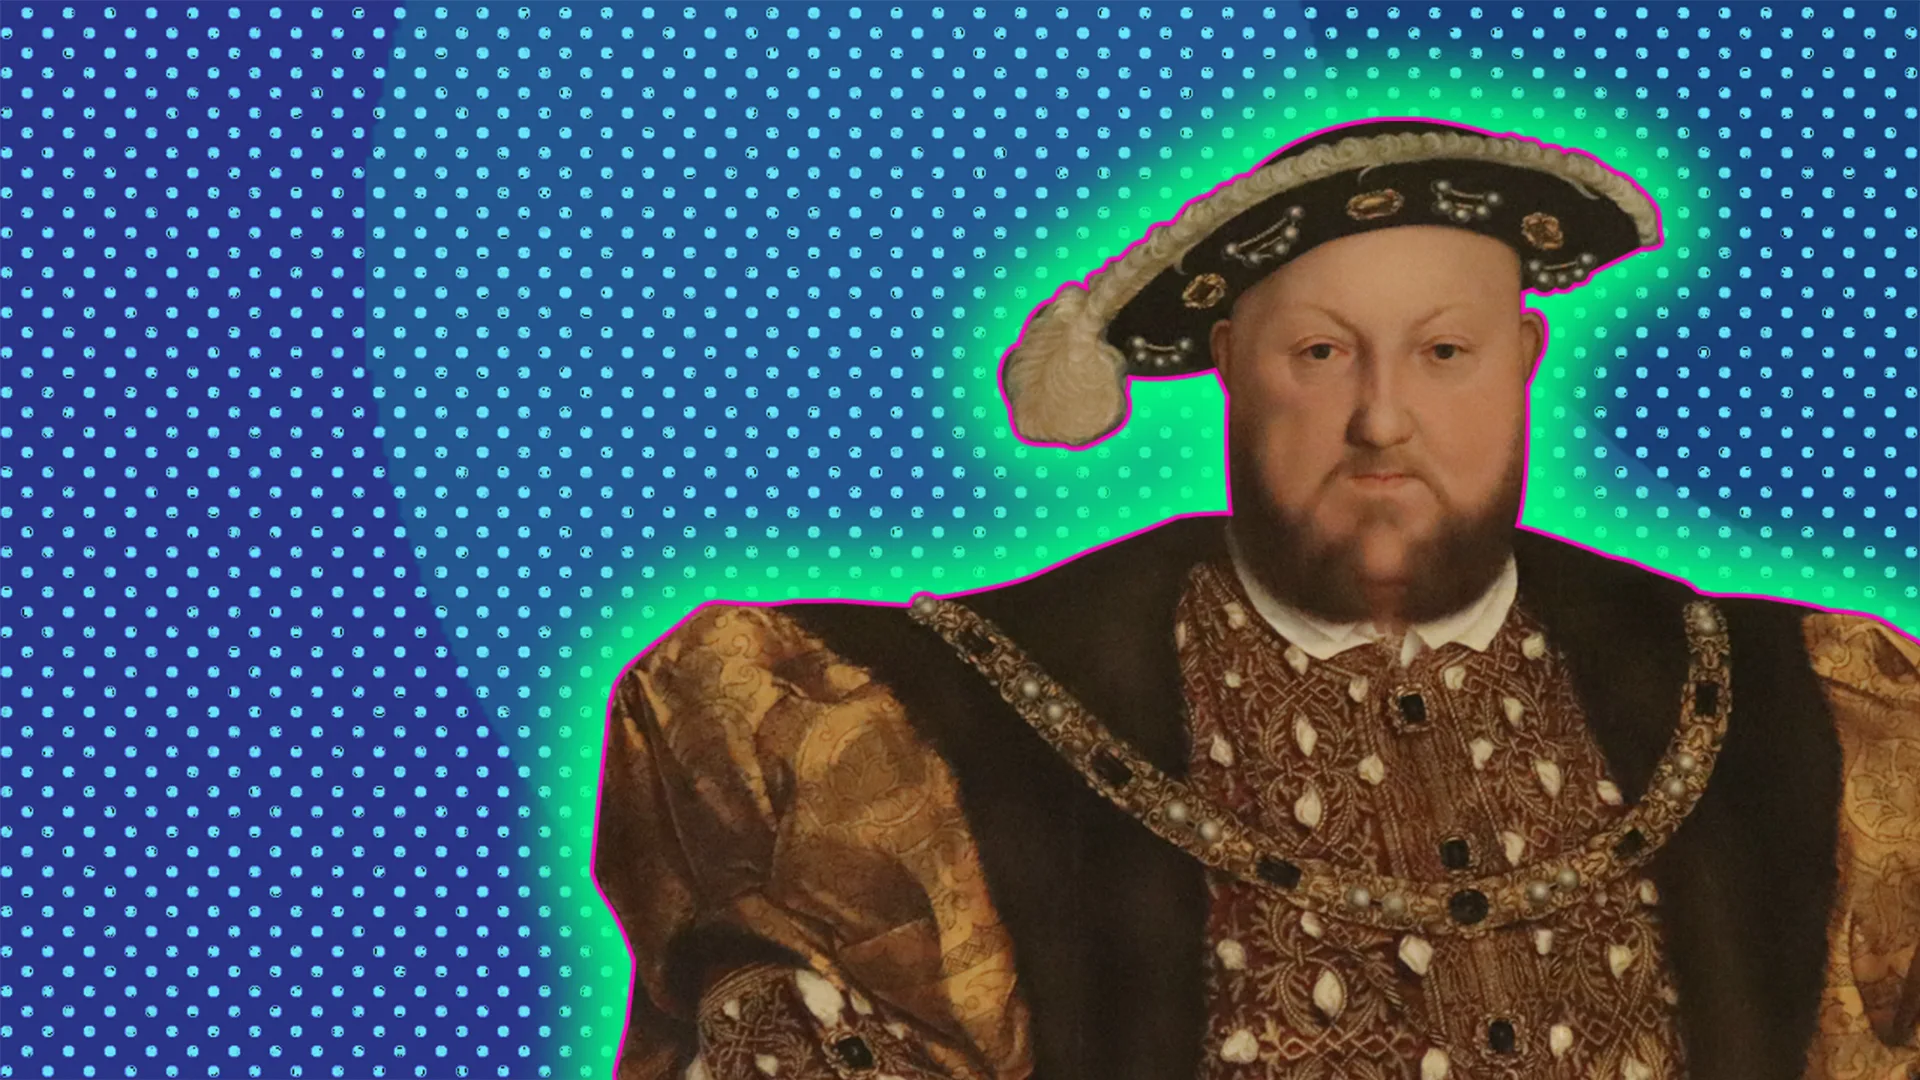 Henry VIII portrait with a polkadot background and a glow around the image;e